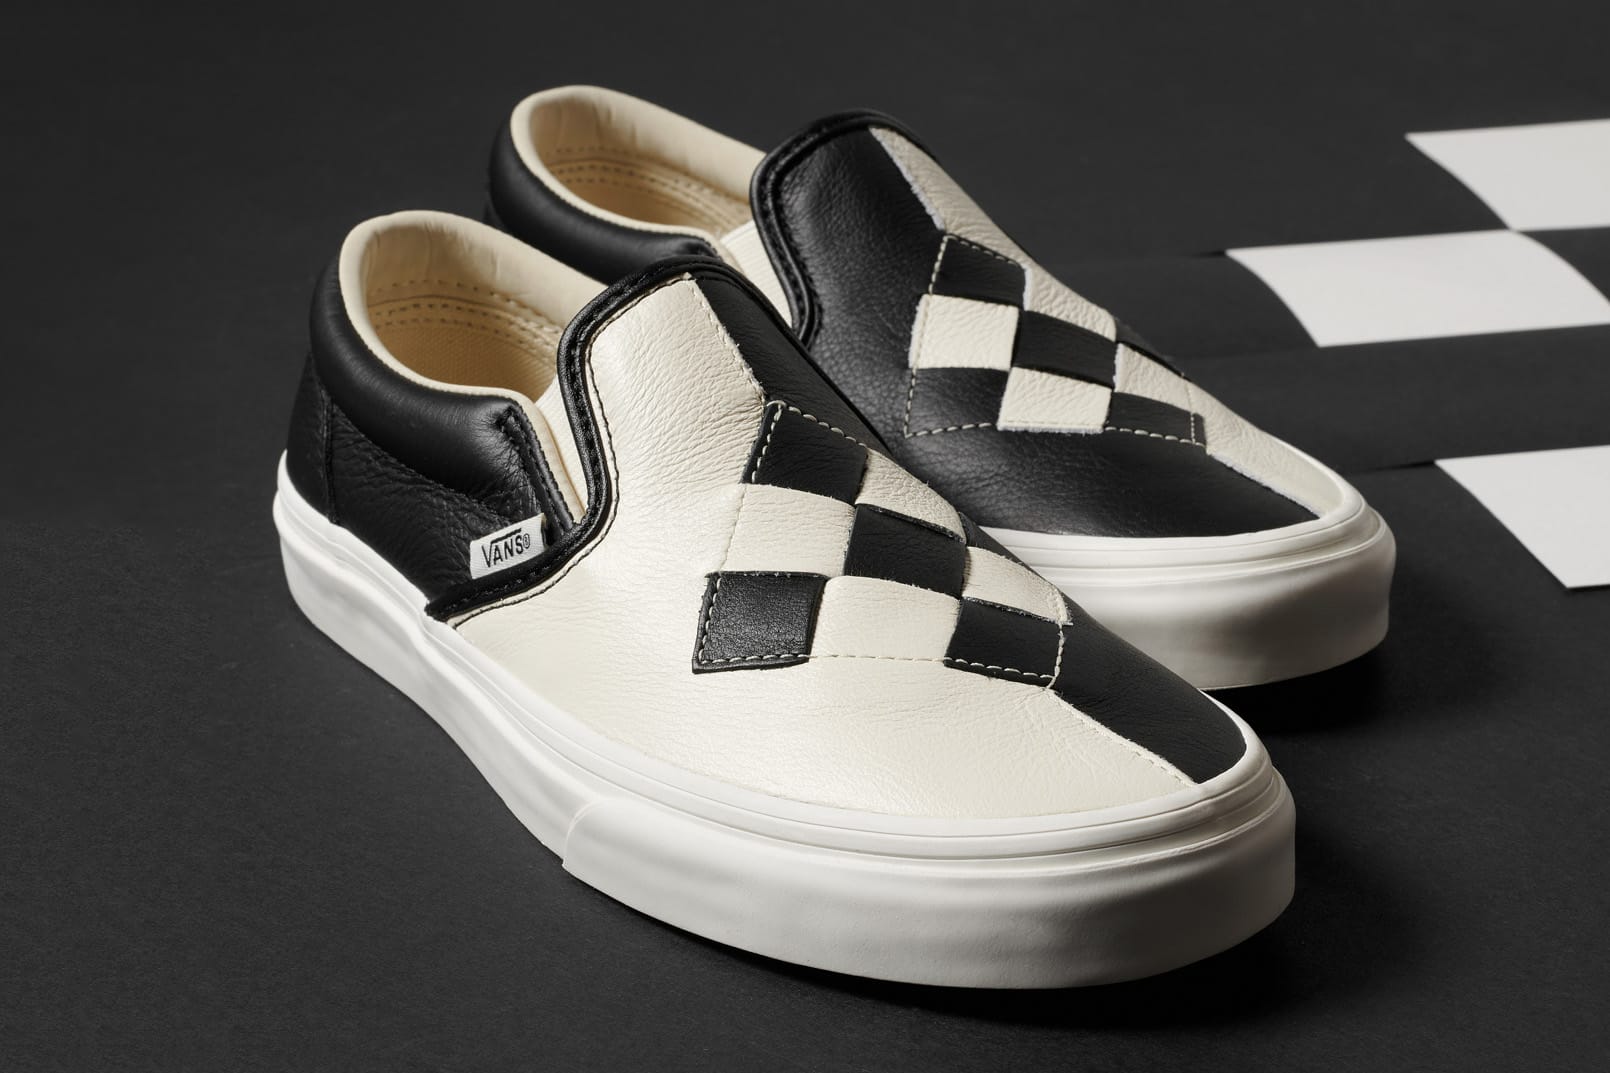 Vans Woven Leather Checkerboard Slip-On 